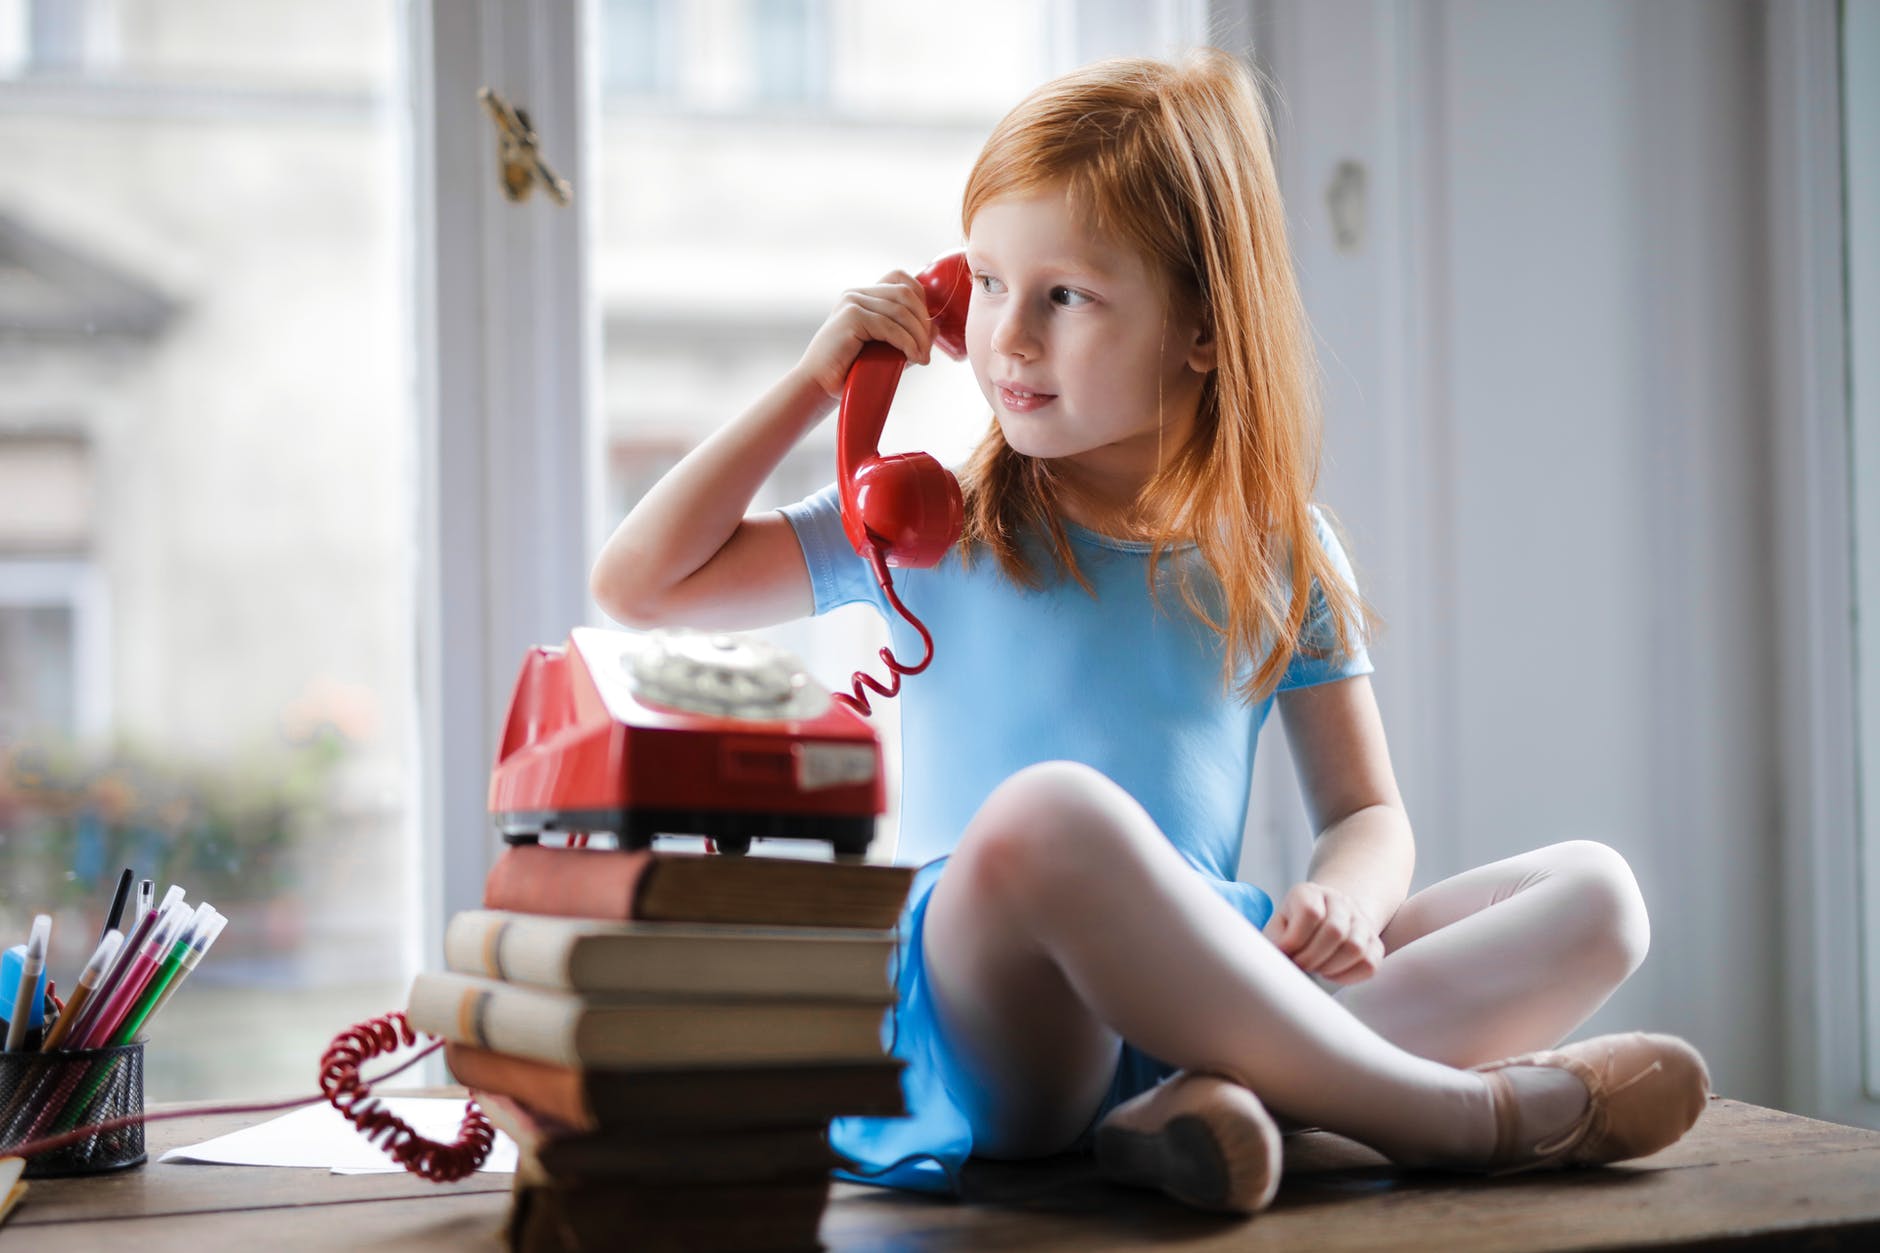 pensive little girl talking on vintage phone while sitting on table in light living room